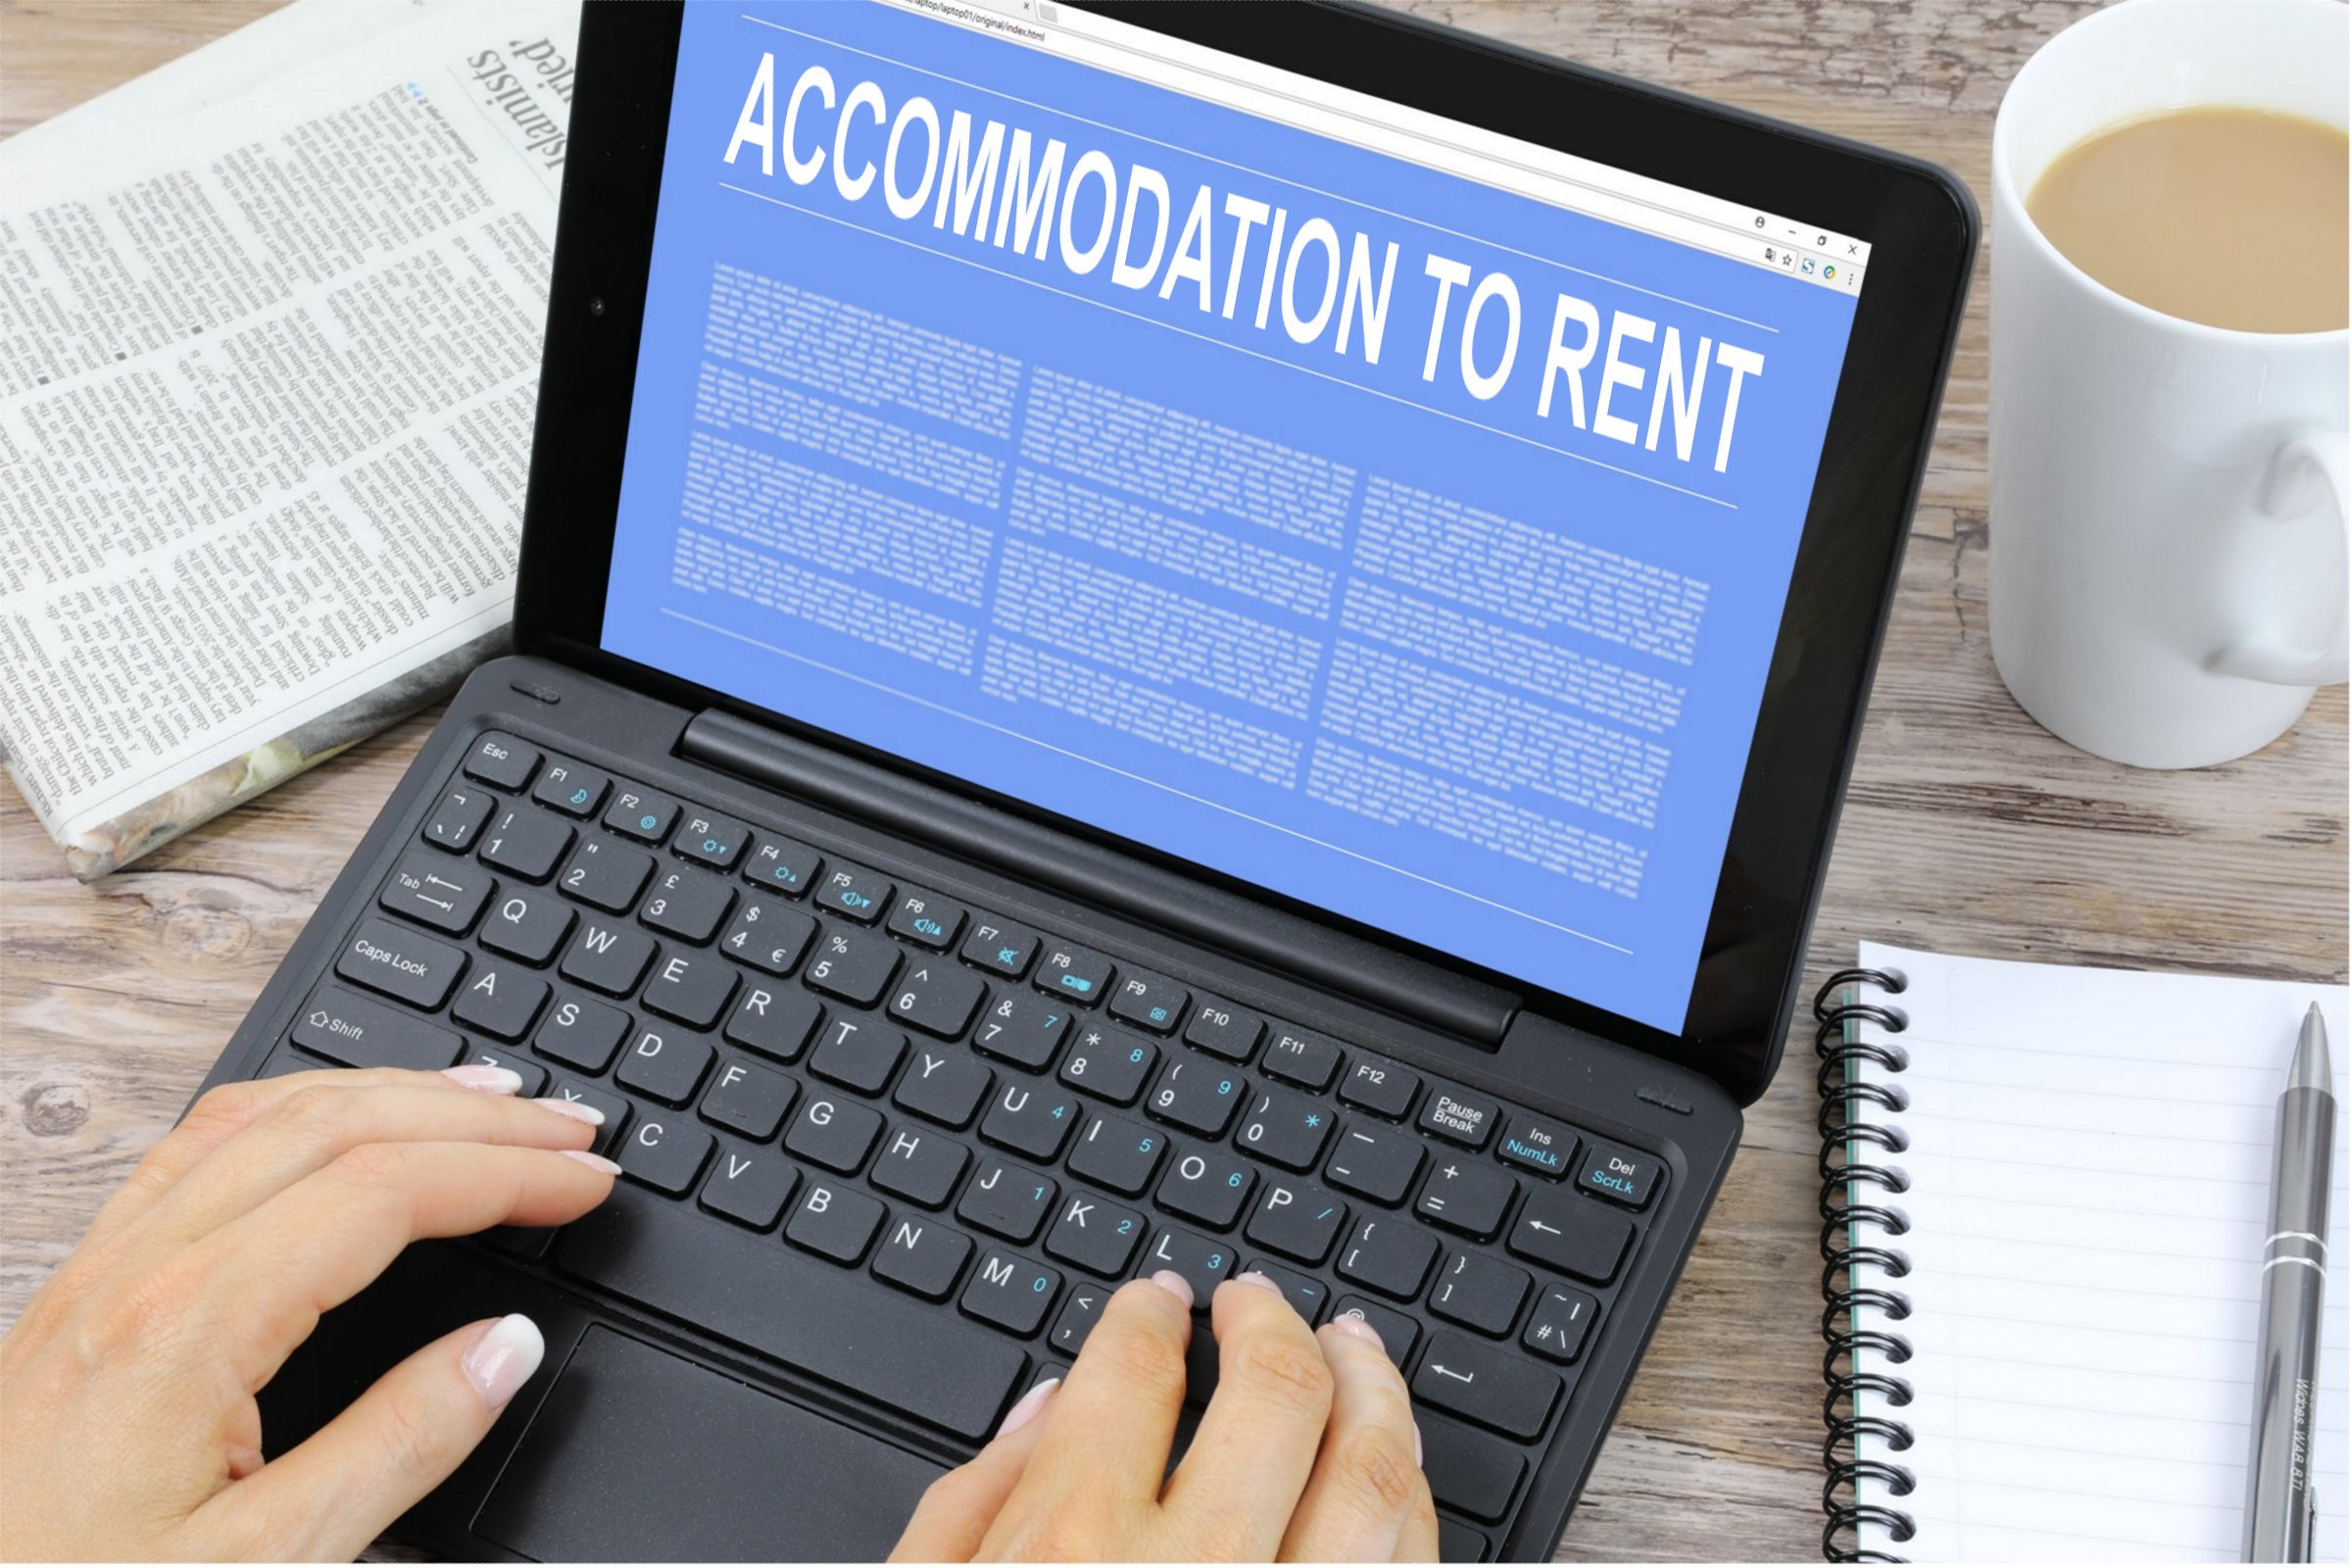 Accommodation to Rent